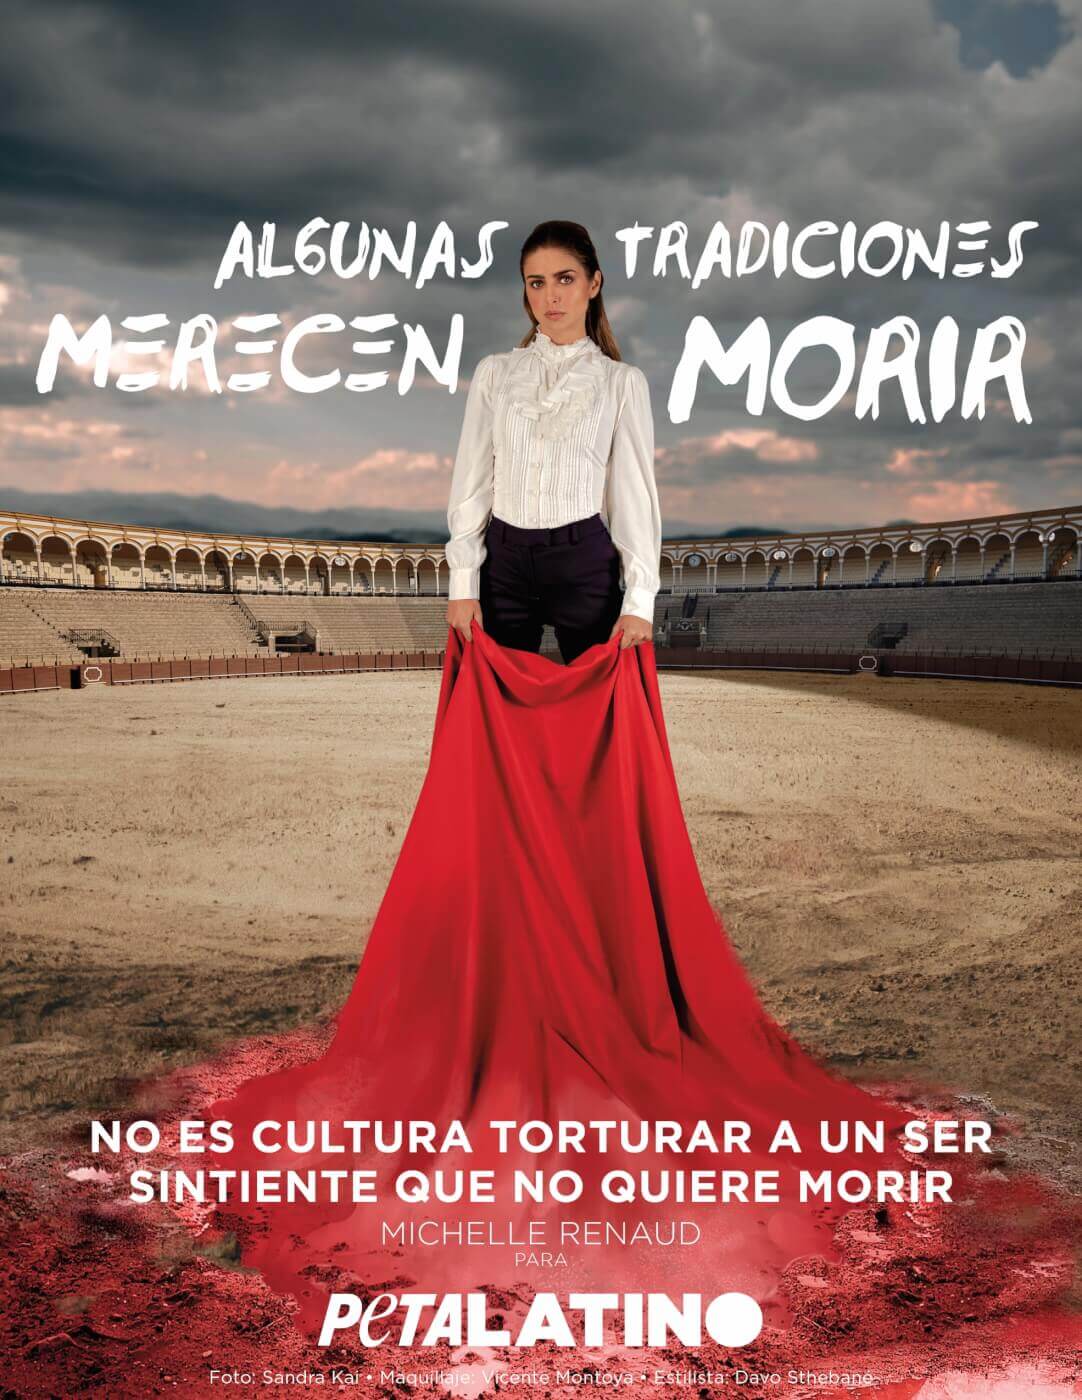 A photo composition of Michelle Renaud in a bullfighting arena holding a red bullfighting sash. Text on the image says "Some traditions deserve to die. It is not culture to torture a sentient being who does not want to die."